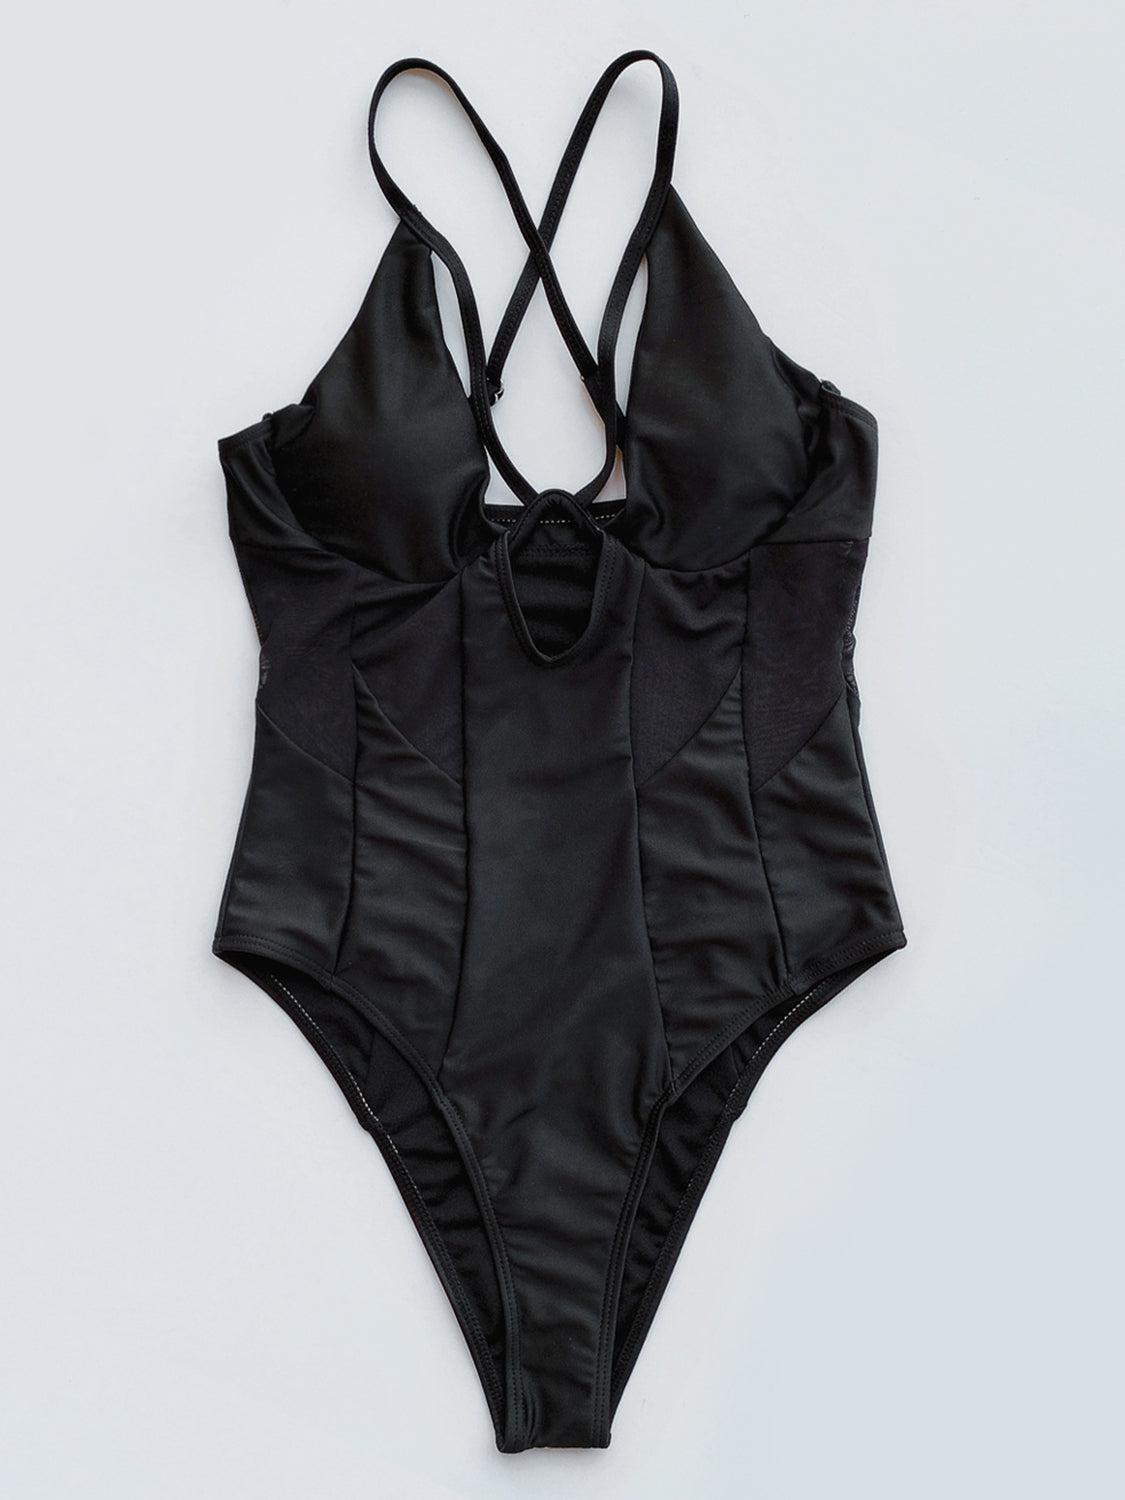 a black one piece swimsuit on a white background